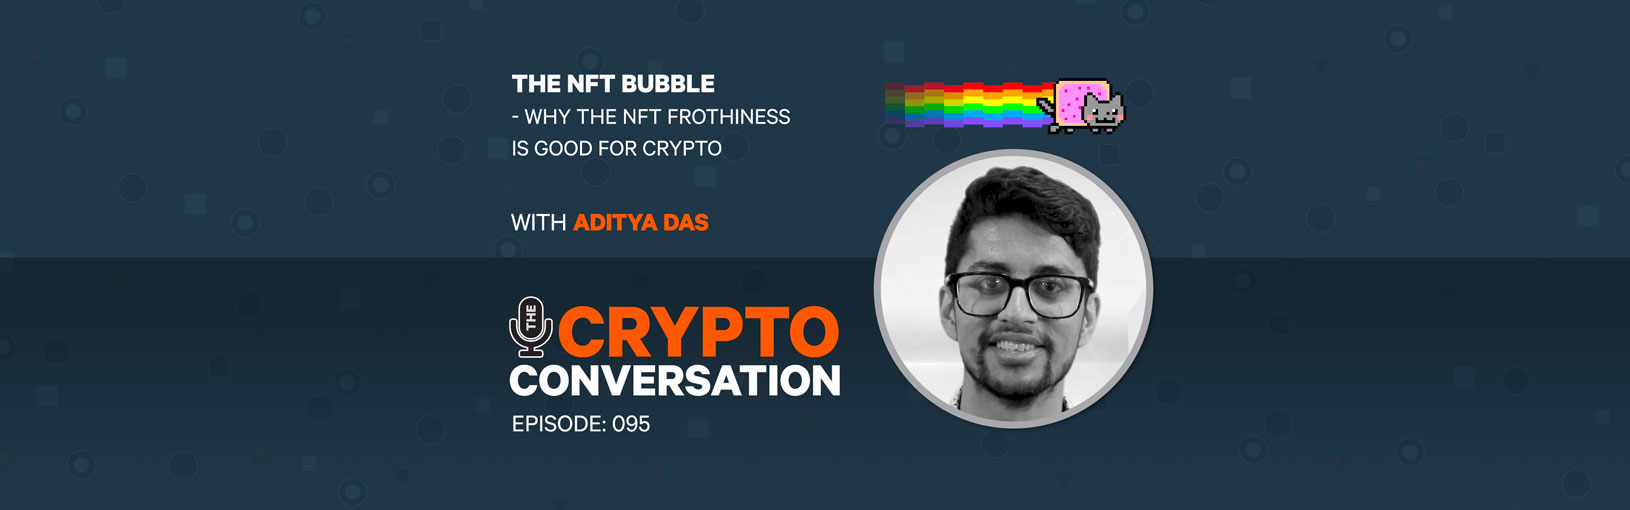 Why the NFT Bubble is good for Crypto